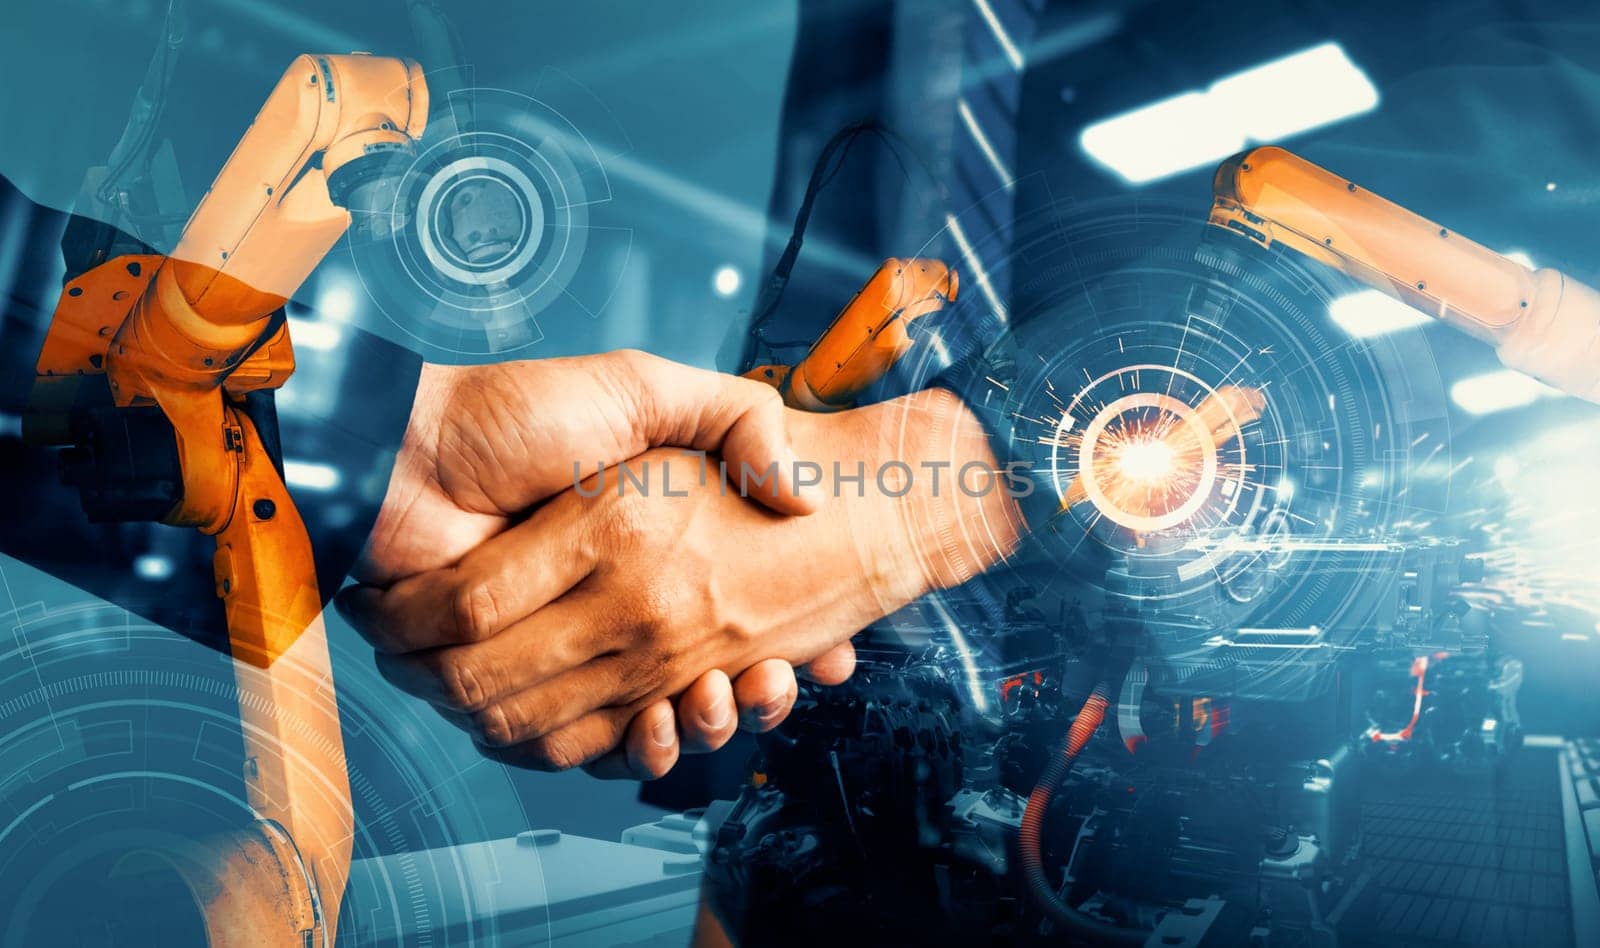 XAI Mechanized industry robot arm and business handshake double exposure by biancoblue